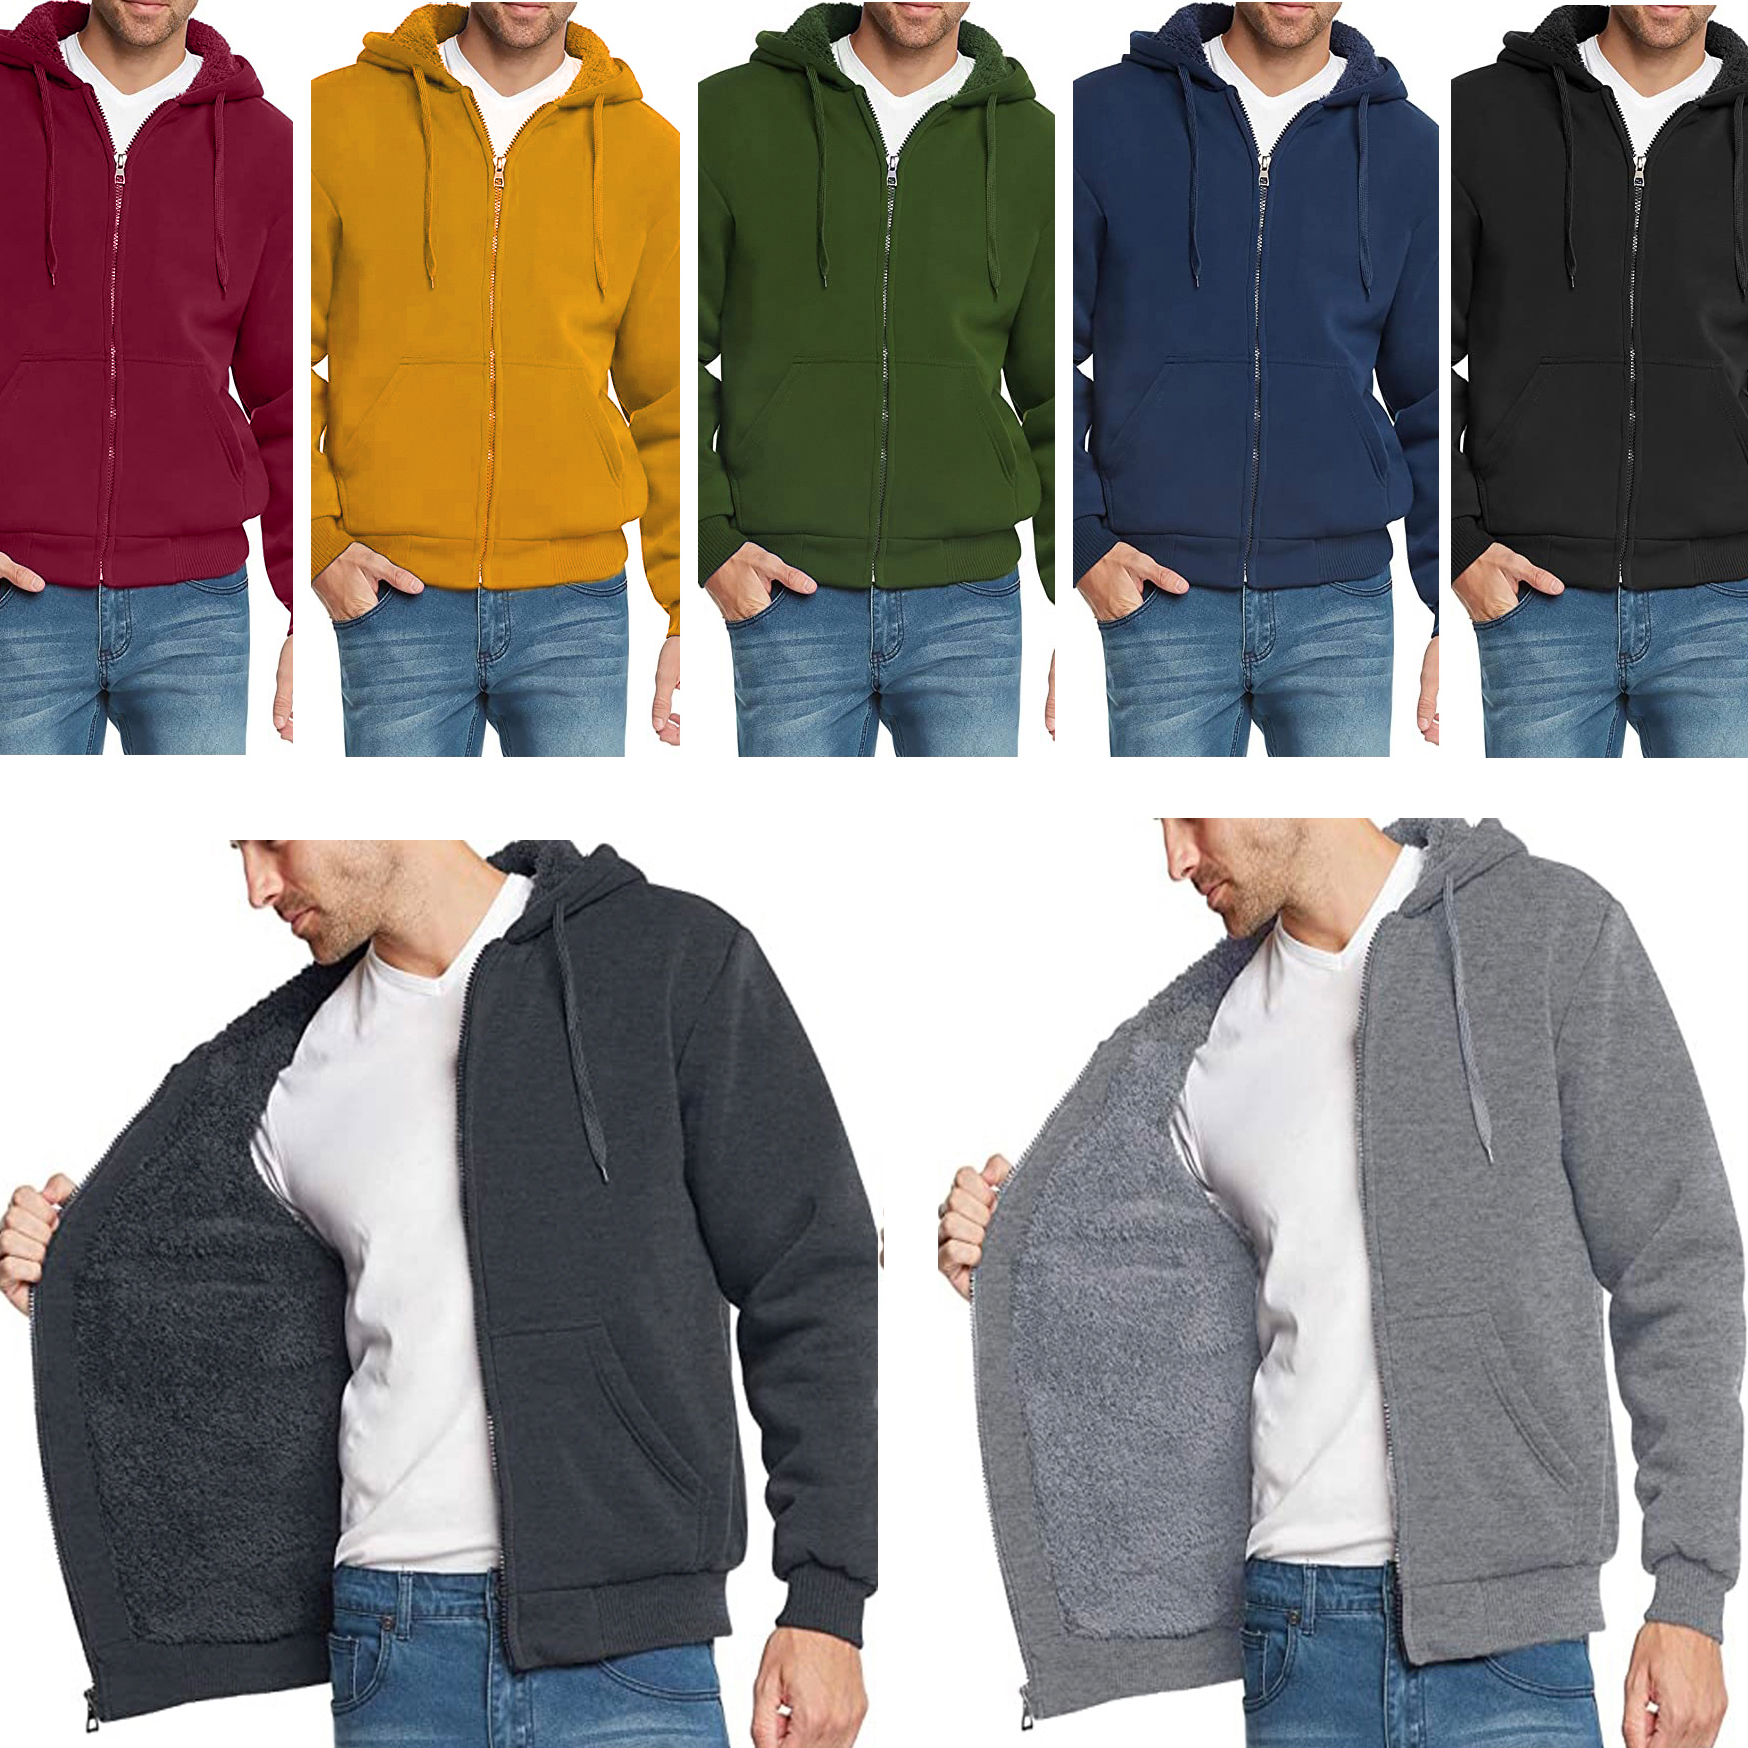 Men's Extra-Thick Sherpa Lined Fleece Hoodie (Big & Tall Sizes Available) - Navy, Large